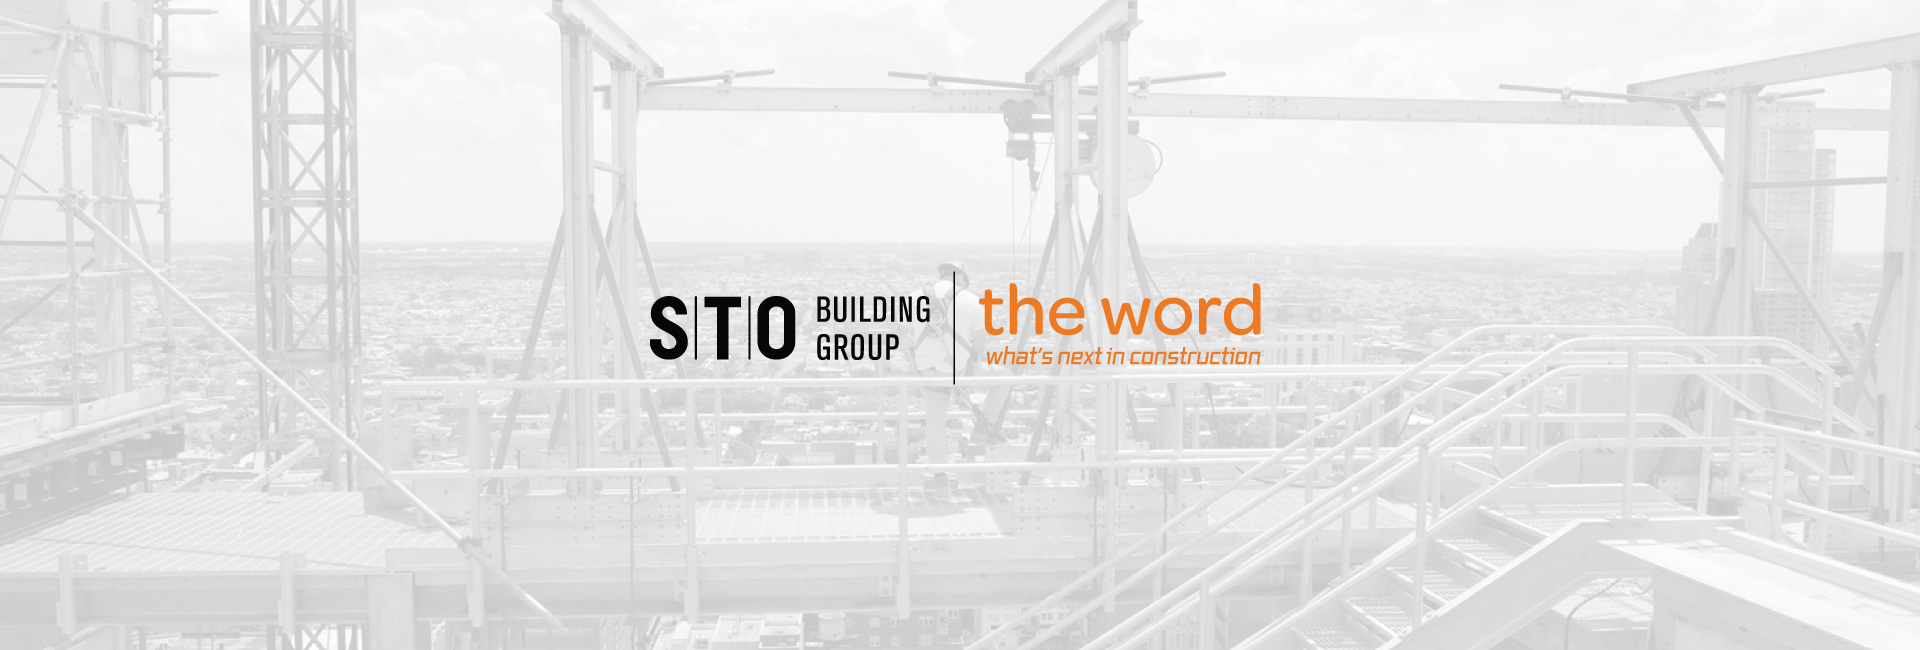 STOBG 'the word: what's next in construction' logo